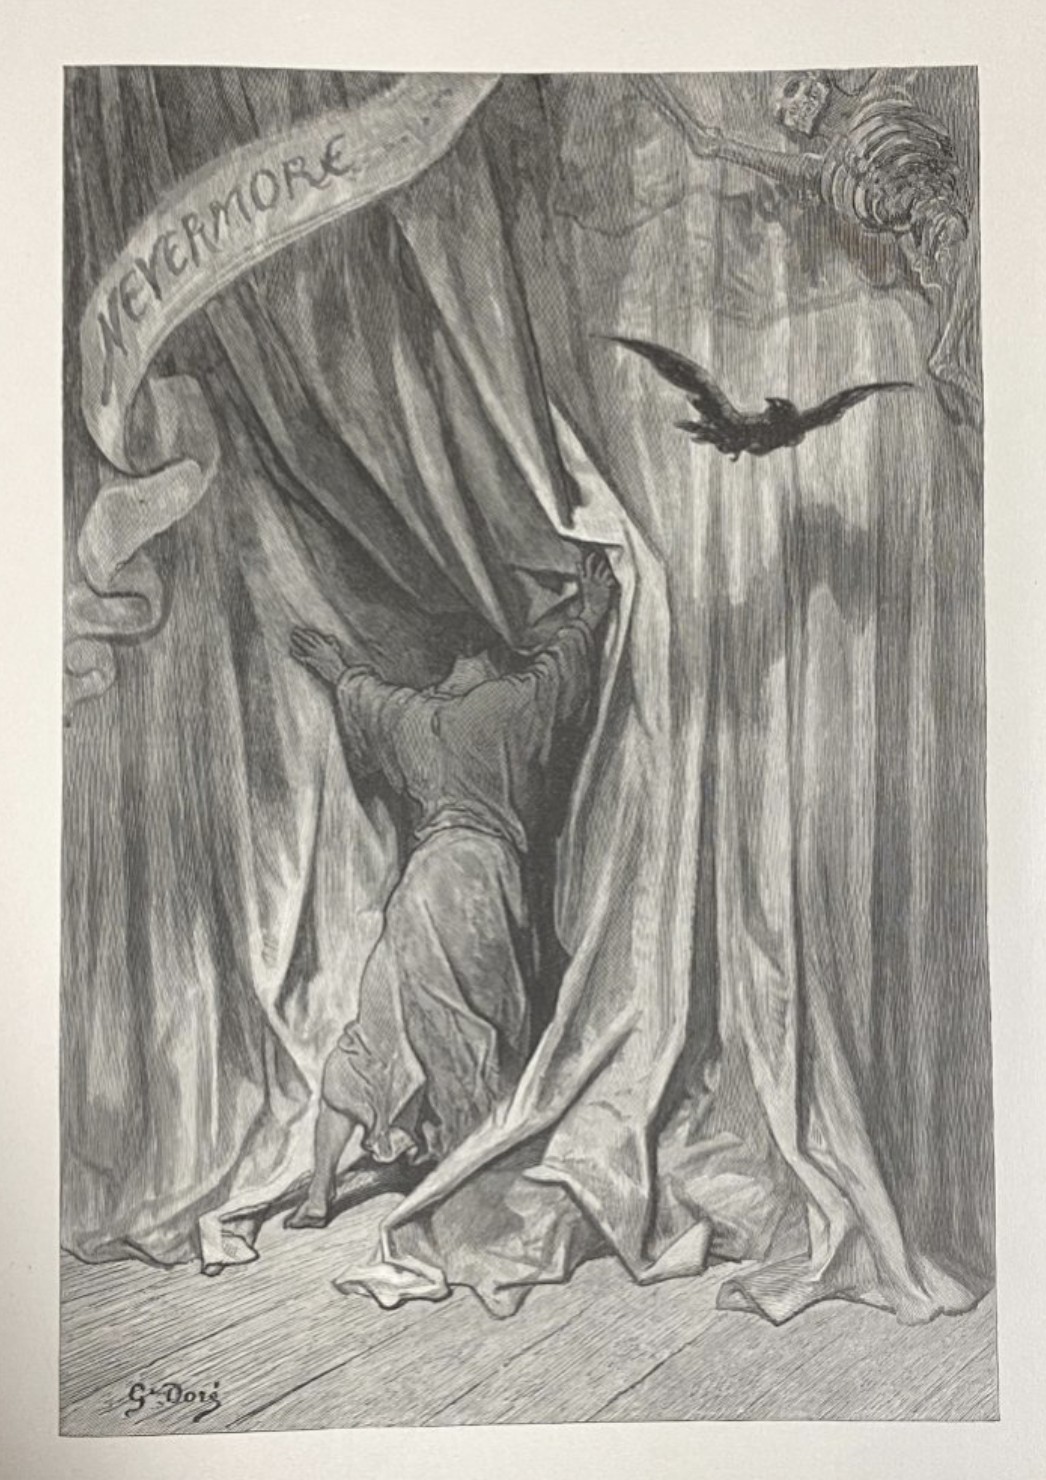 Image from Dore's illustrated The Raven by Edgar Allan Poe